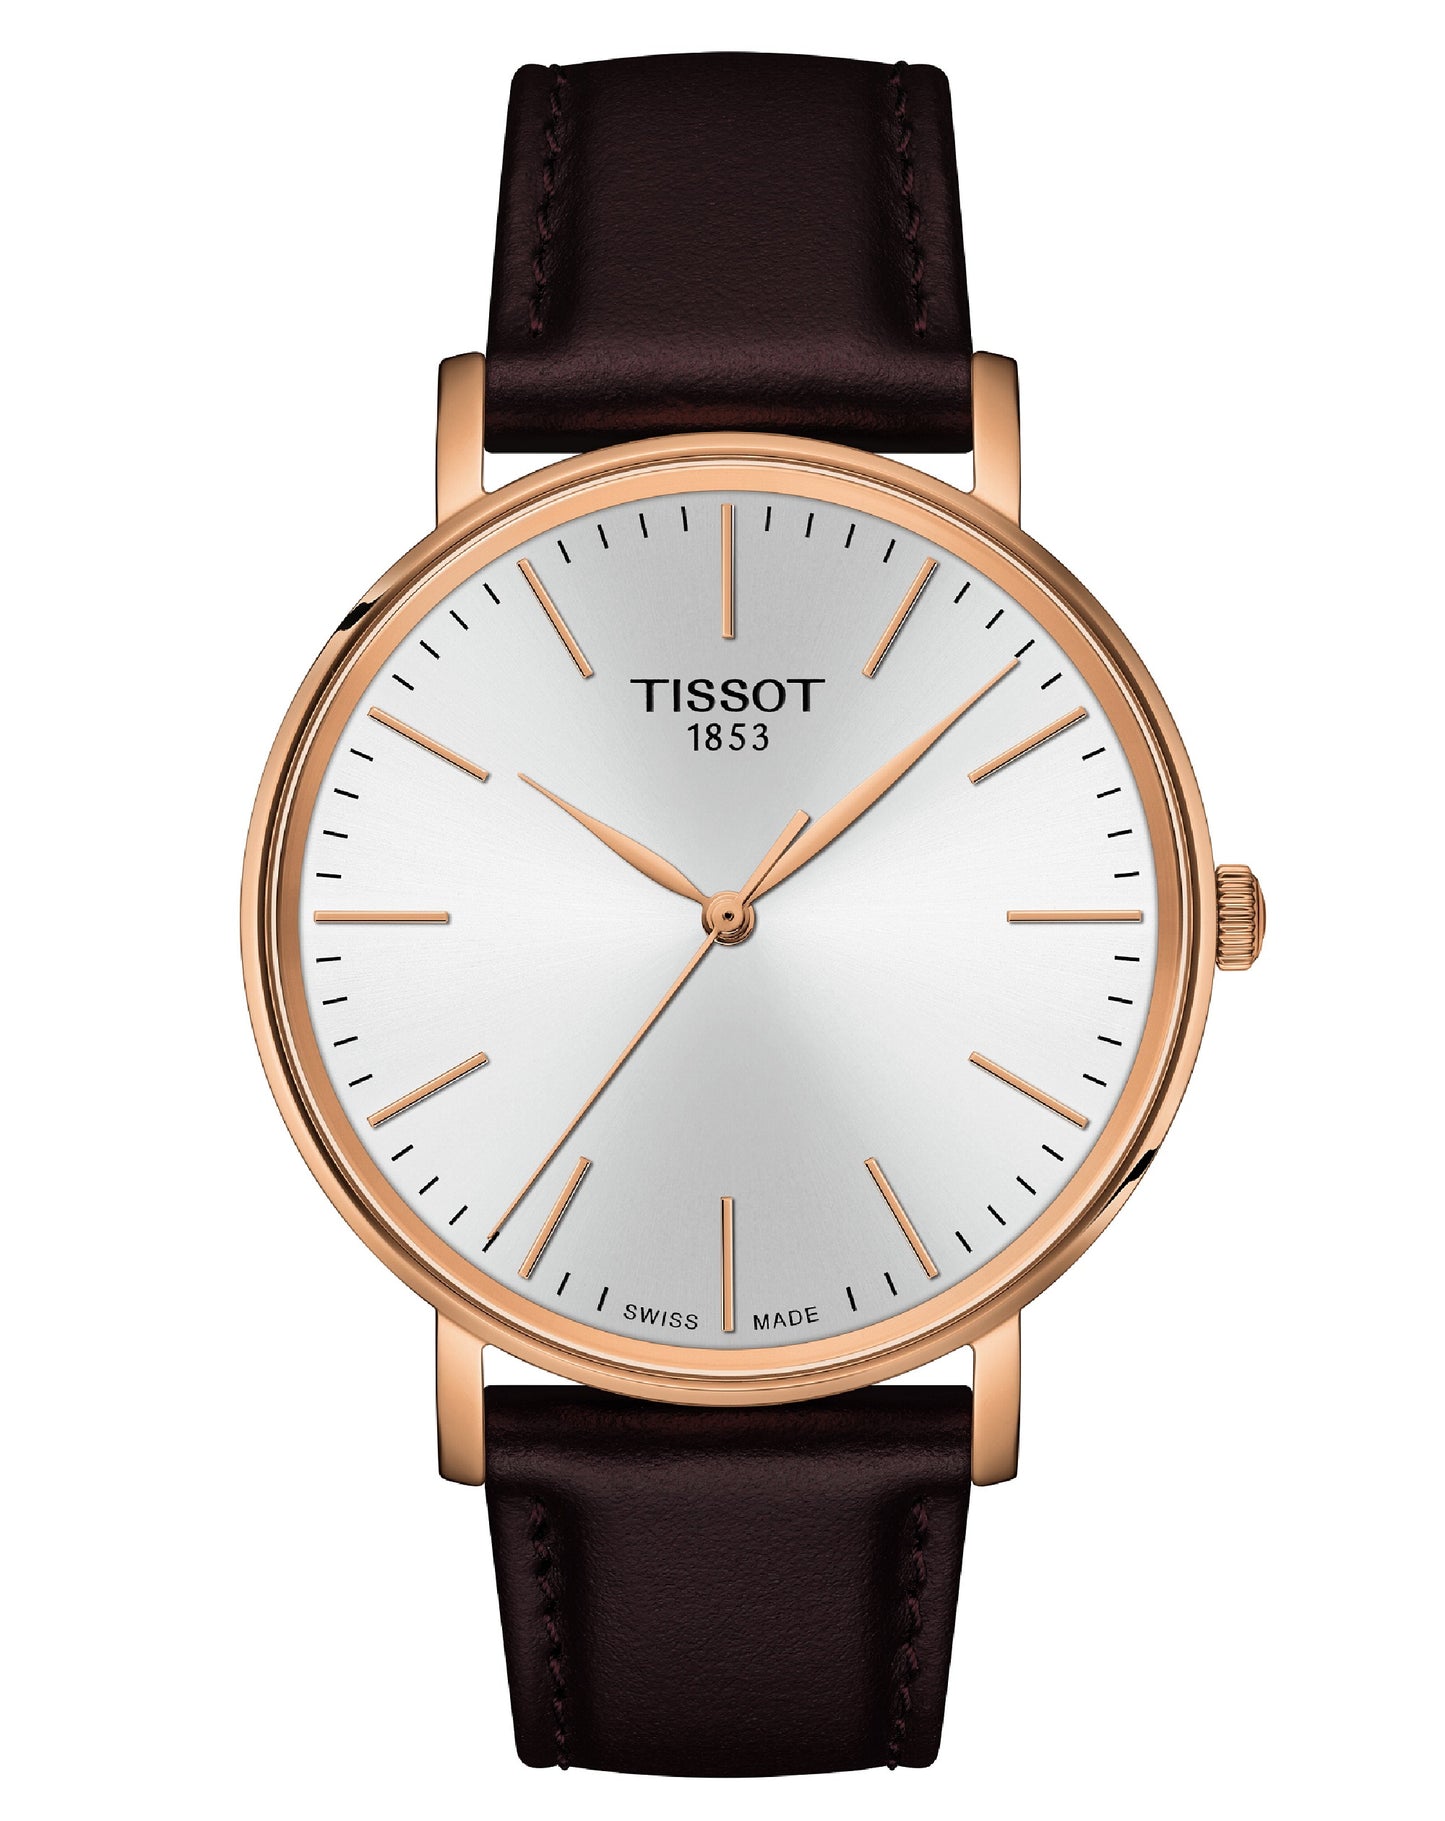 Tissot T143.410.36.011.00 Tissot EVERYTIME Gent BROWN Leather Watch